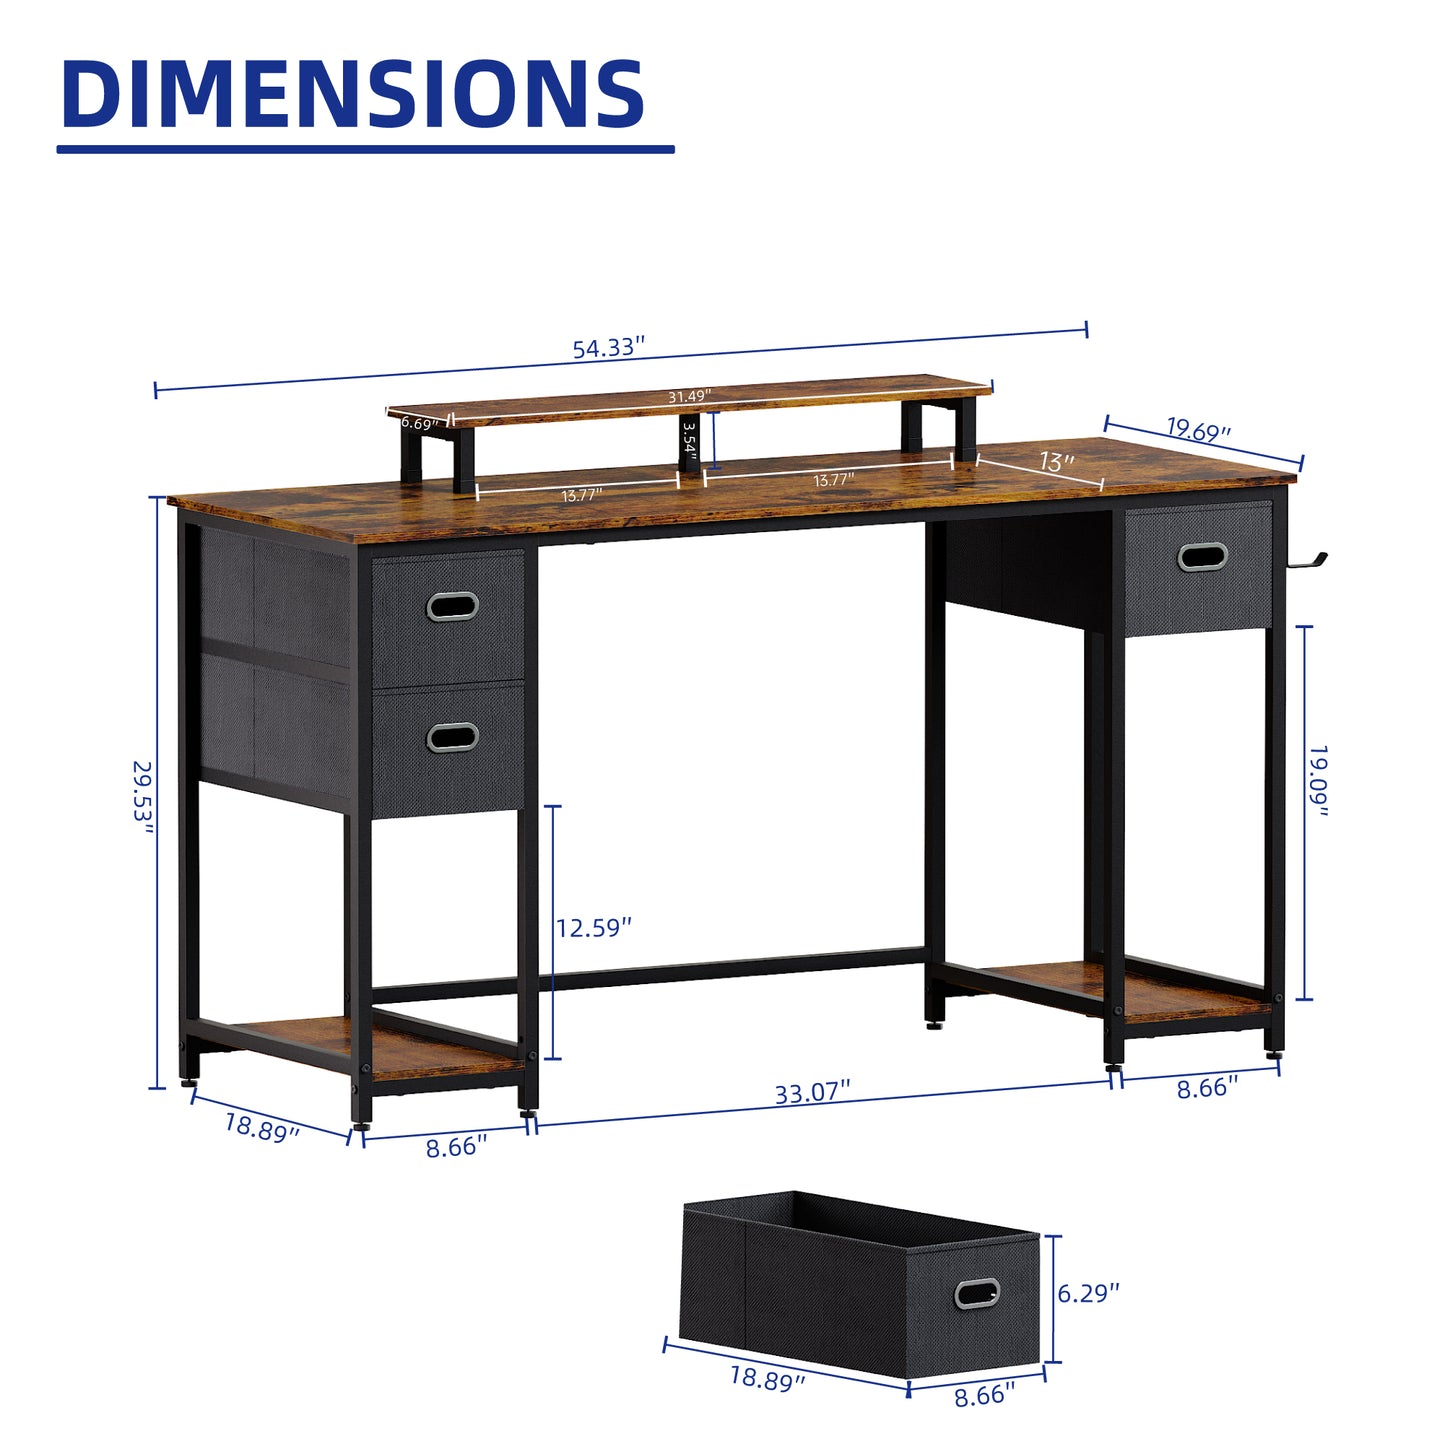 PAMRAY 55 Inch Computer Desk with Storage Drawers and Monitor Stand Home Office Desk for Bedroom Study Table Writing and Work Desk